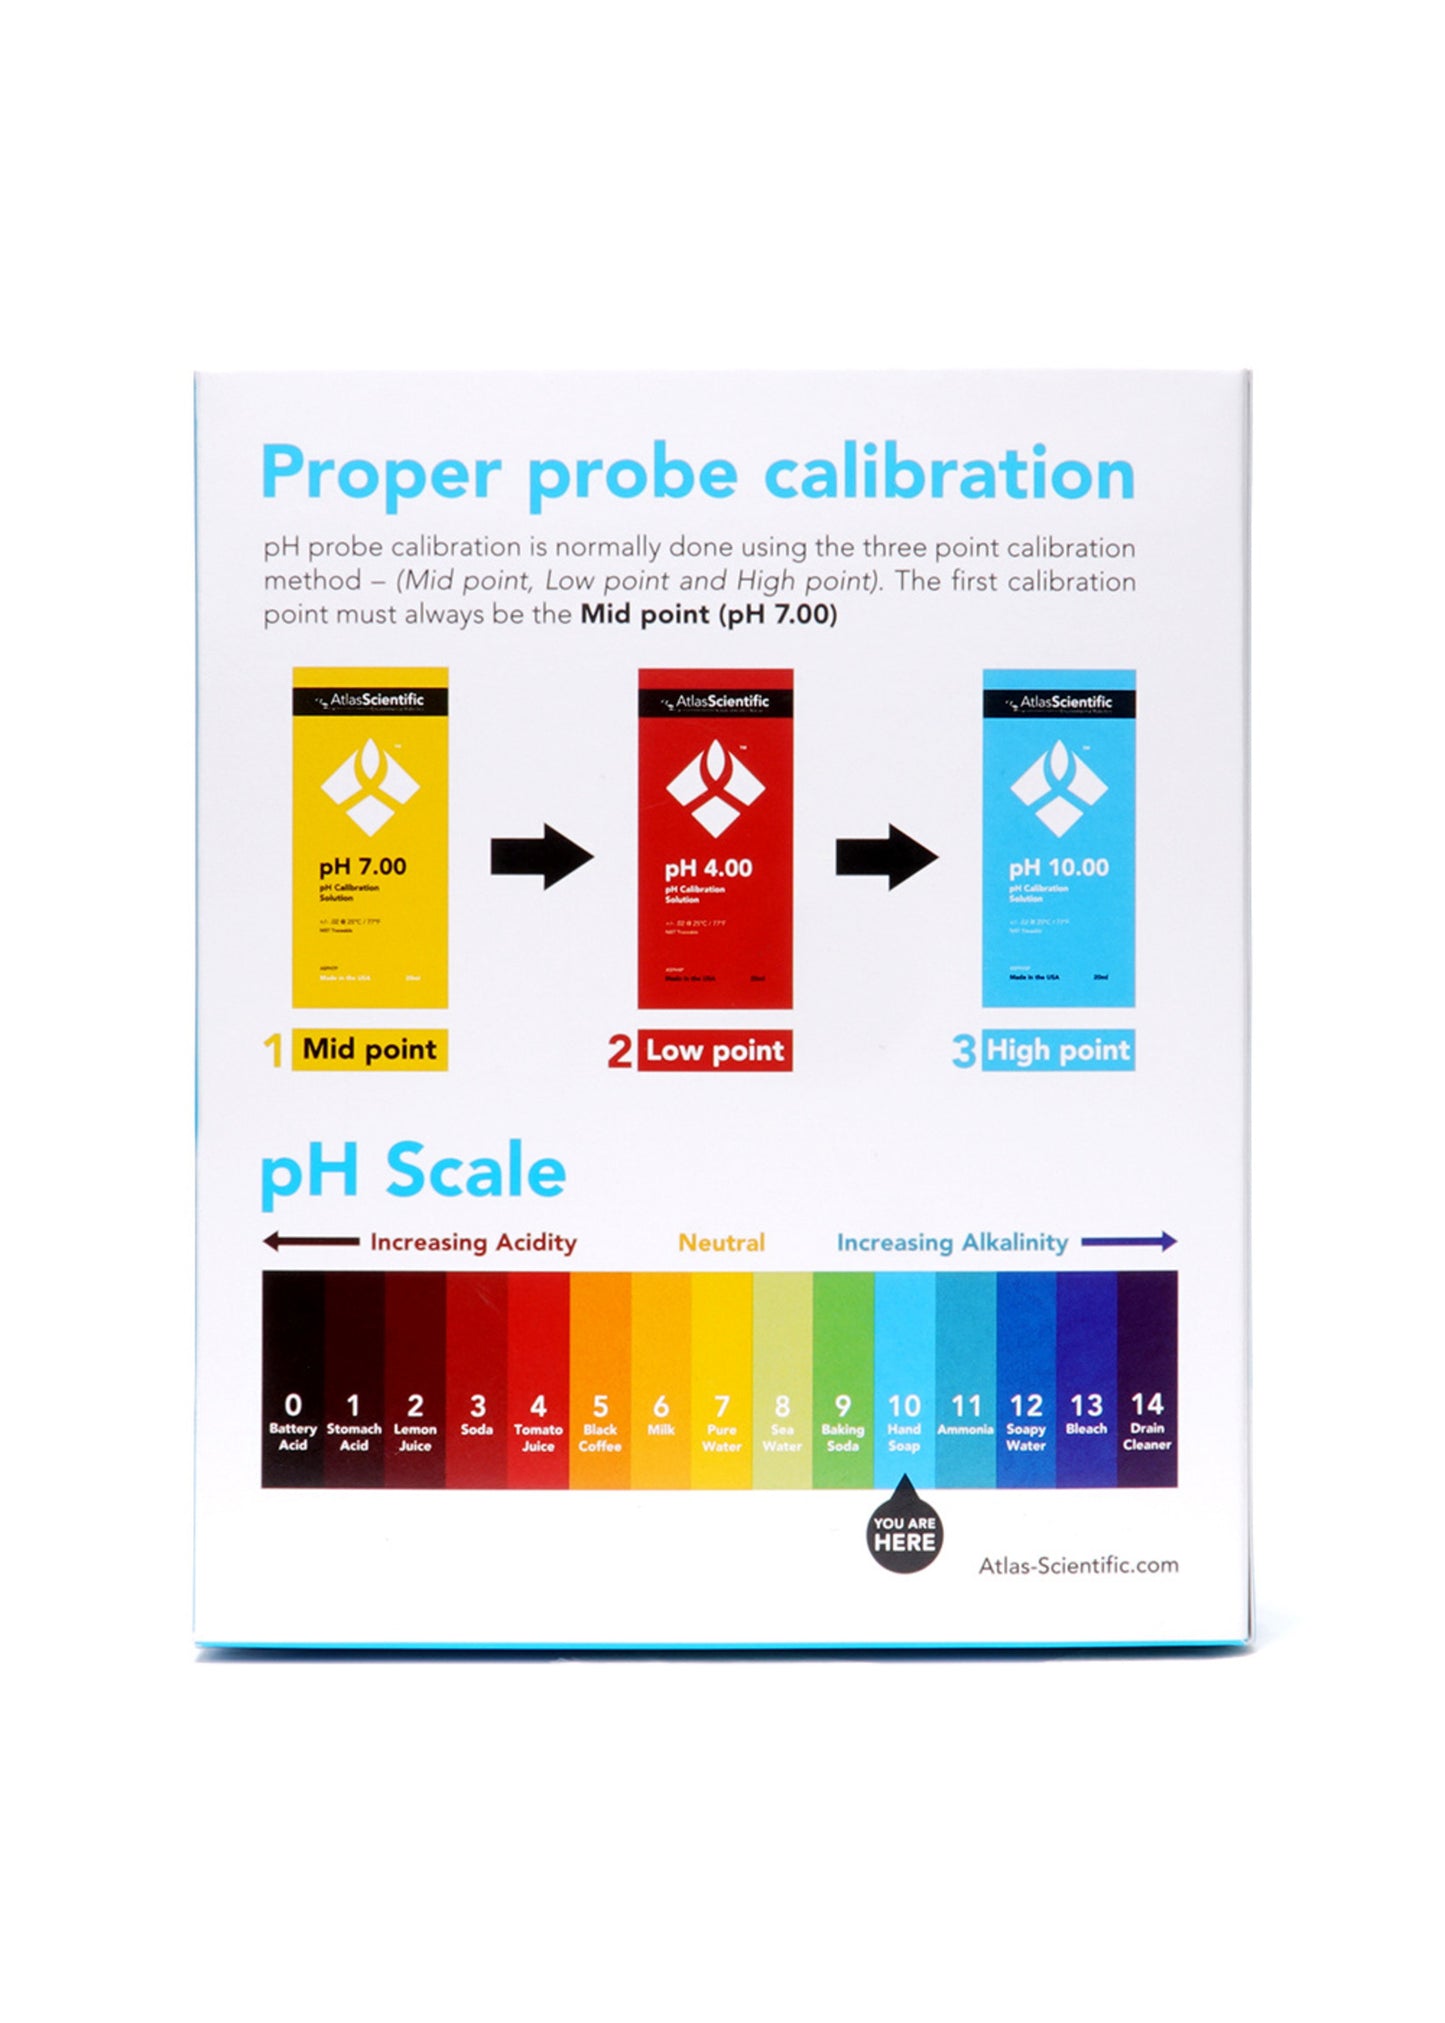 pH 10.00 Calibration Solution Pouches (Box of 25)